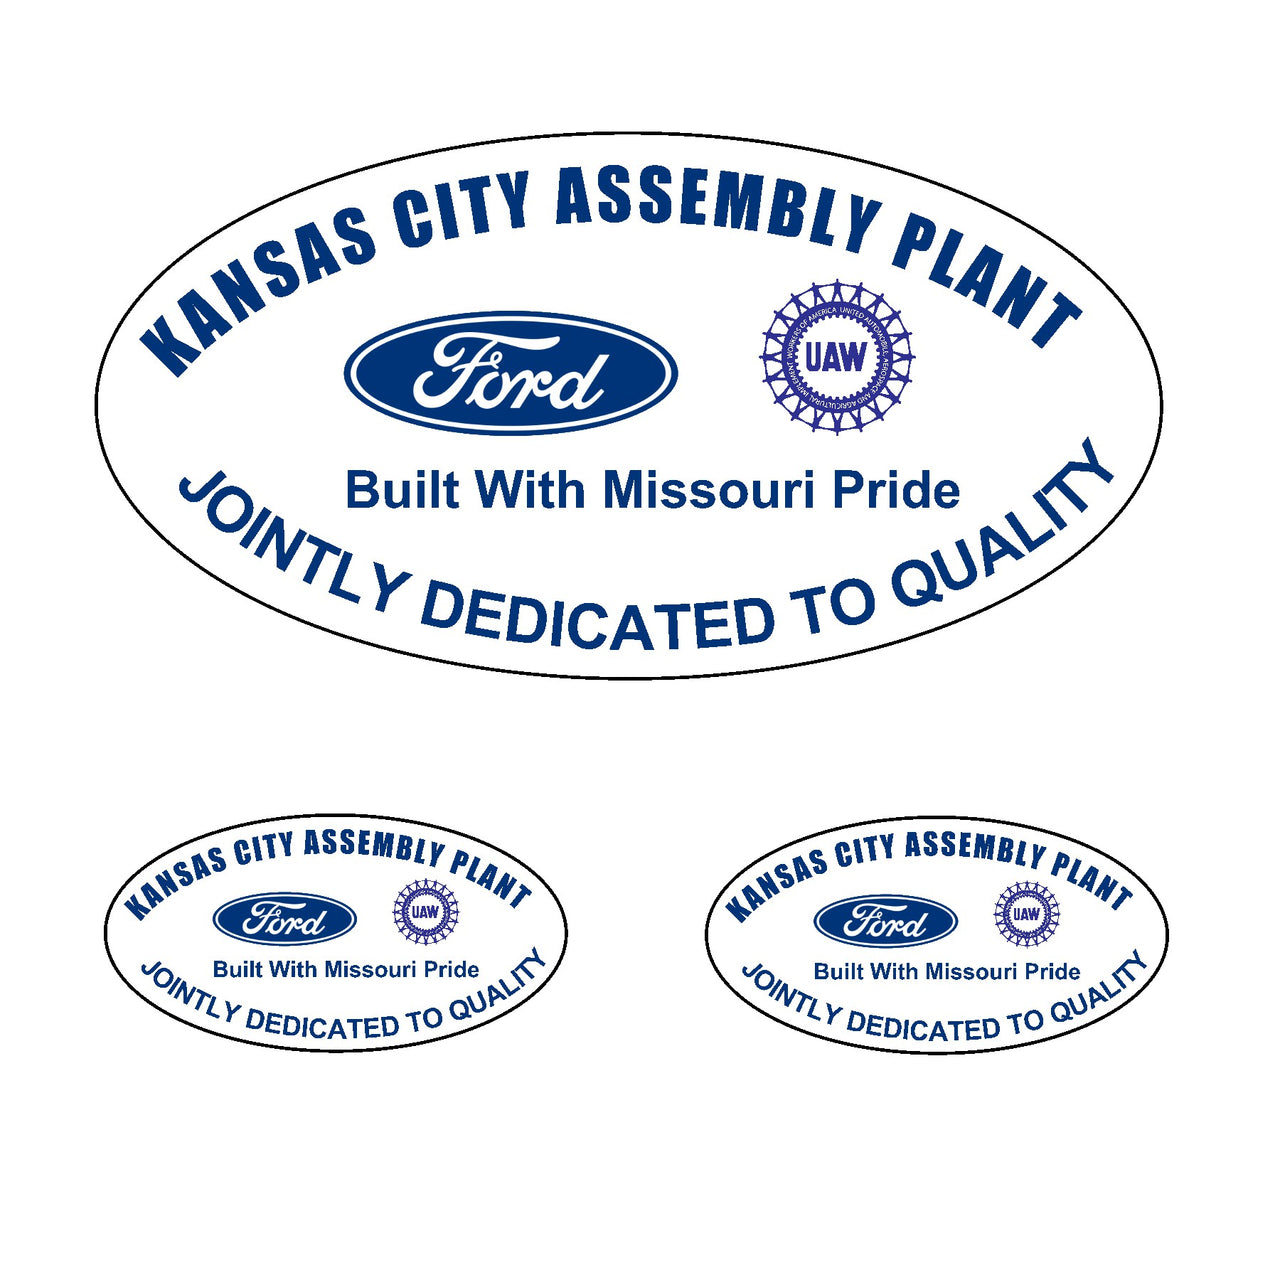 3 Pcs Kansas City Assembly Plant, Ford UAW, Built With Missouri Pride Jointly Dedicated to Quality Car Decal